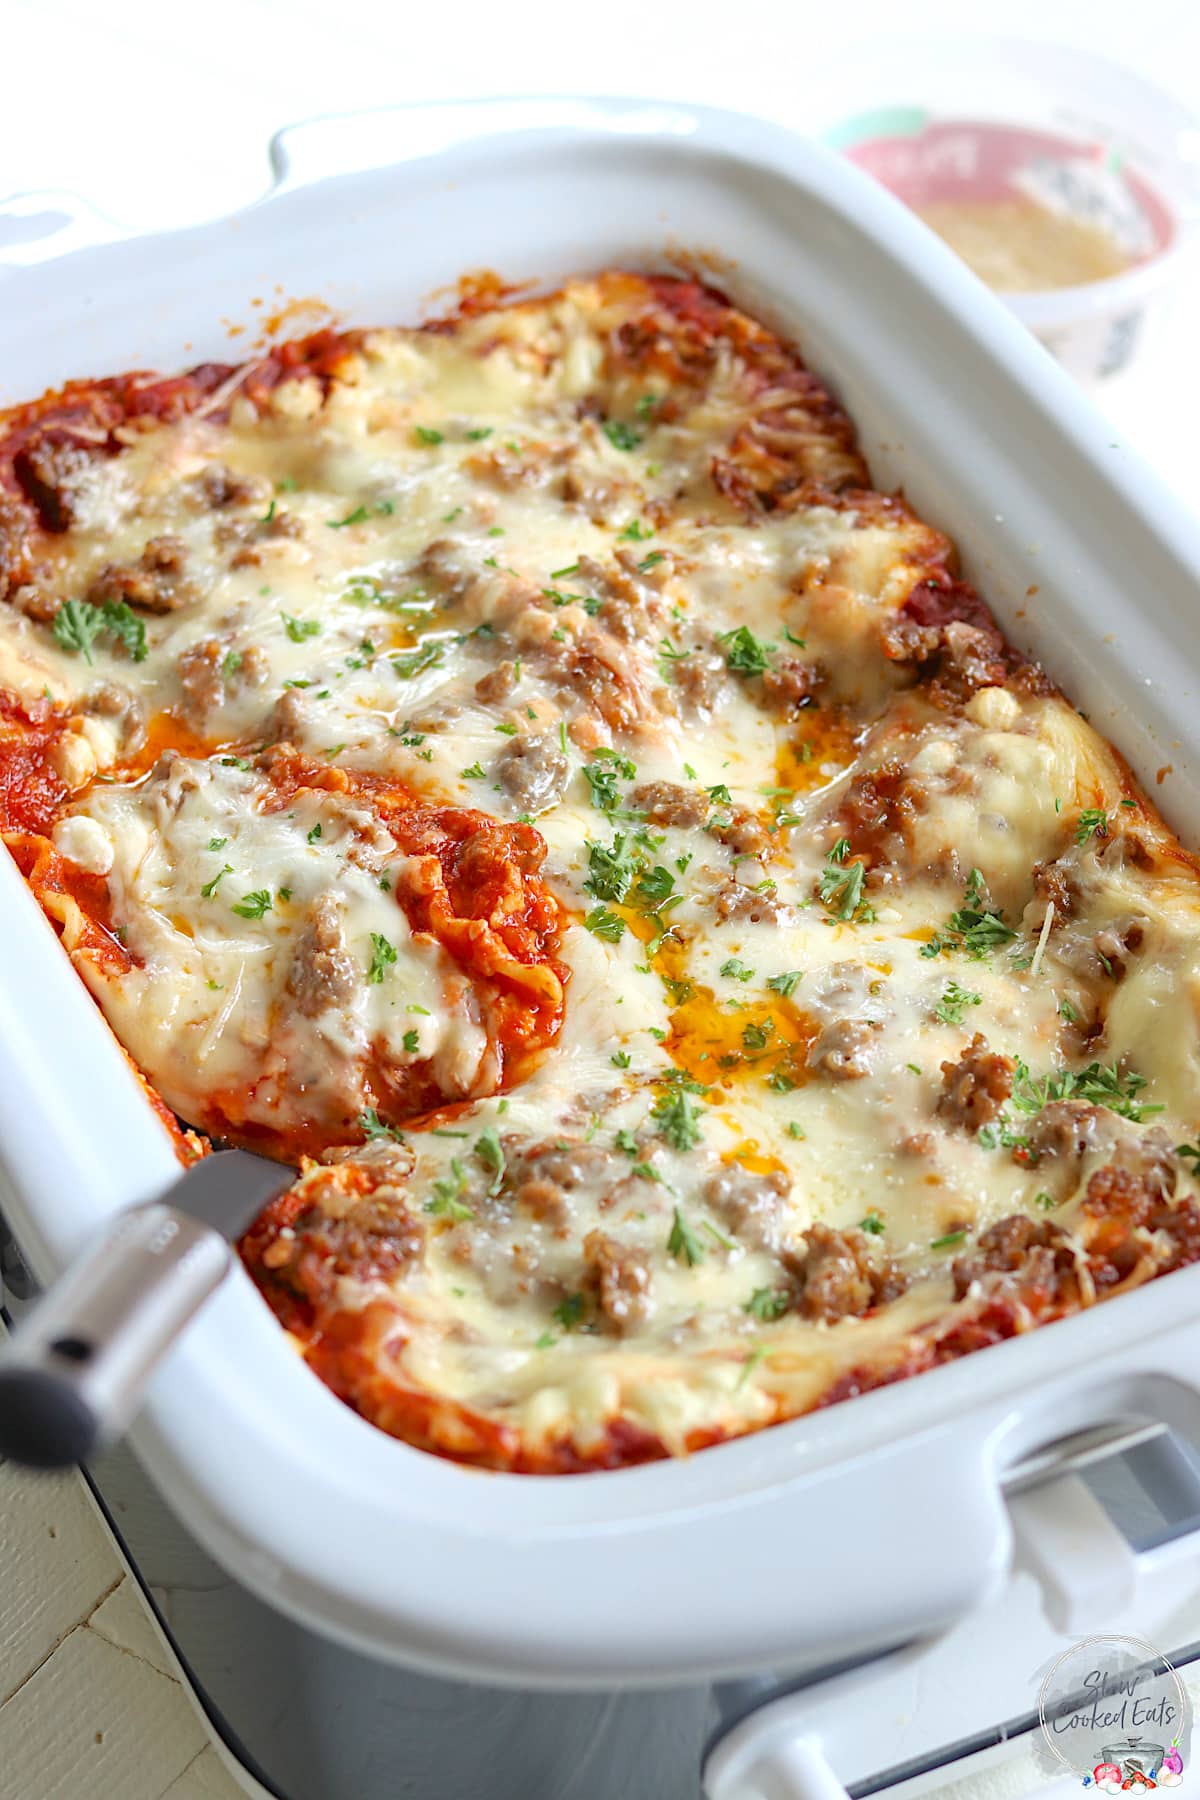 Crockpot lasagna cooked in a white and gray rectangle slow cooker with a serving spoon.